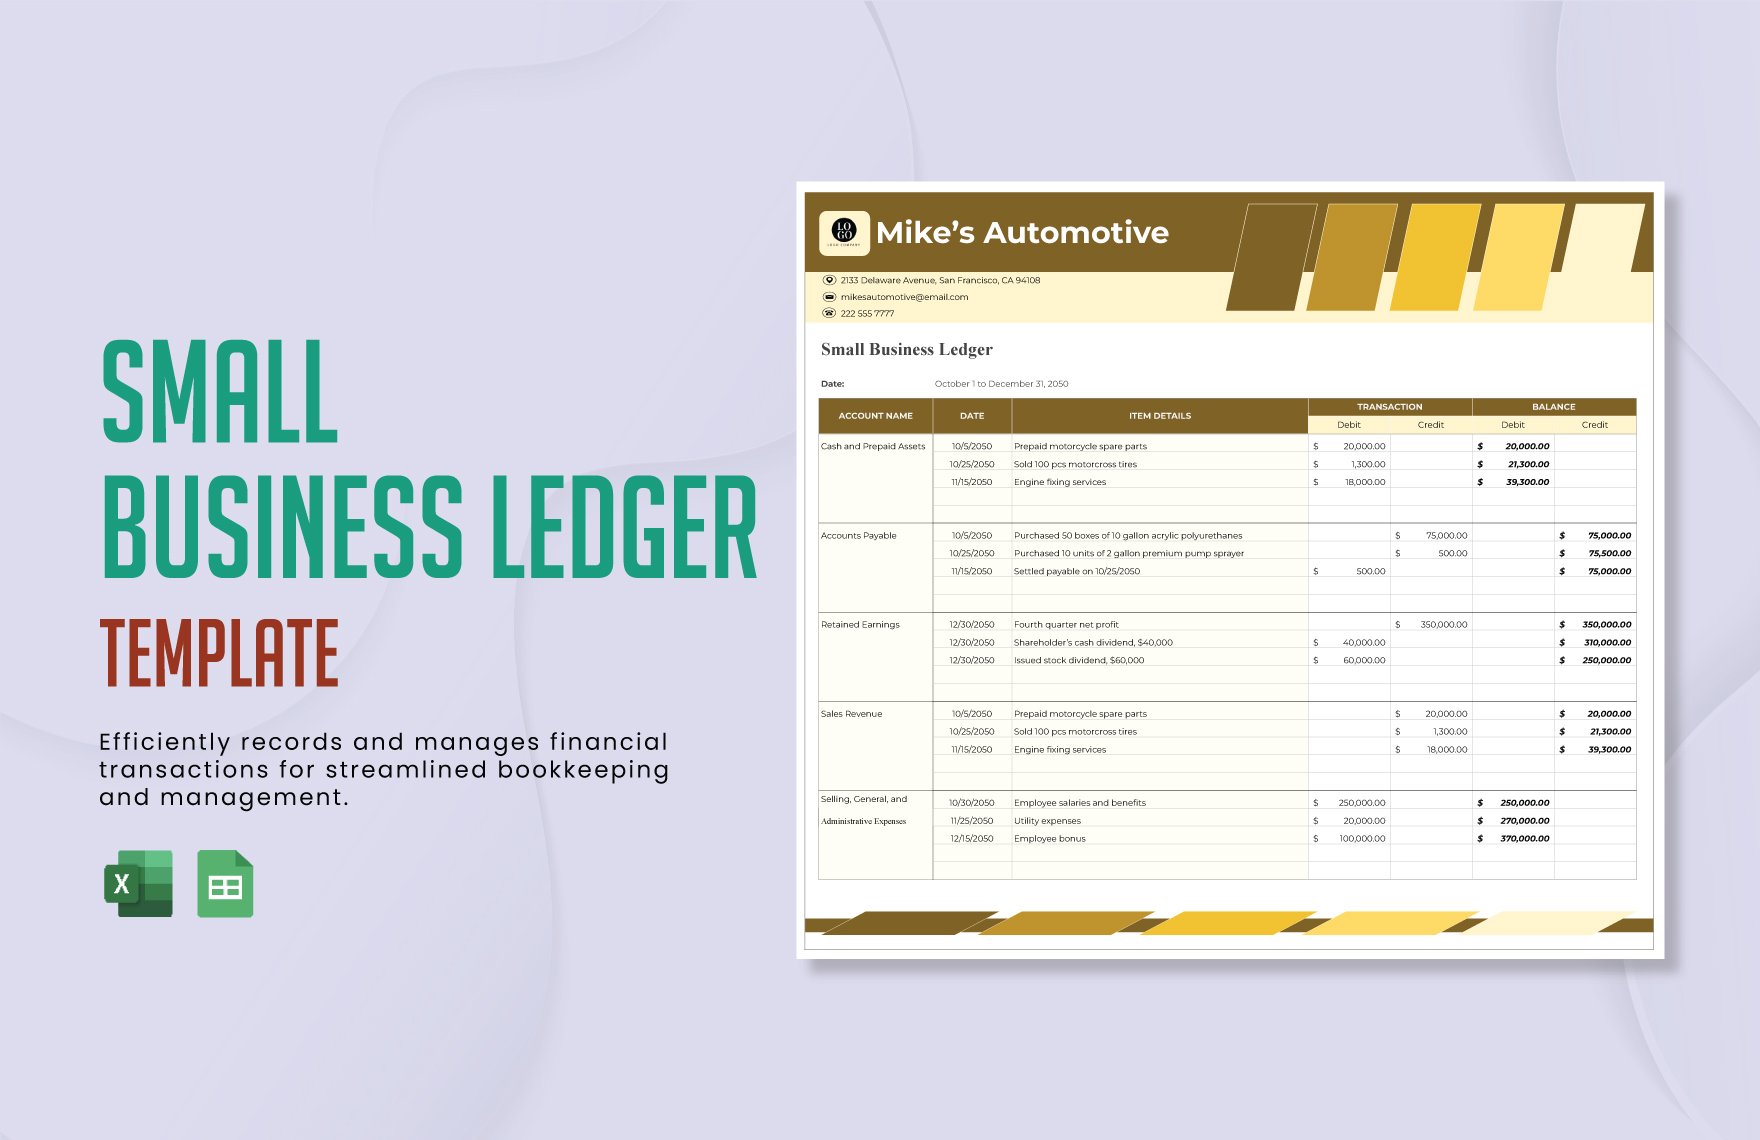 Small Business Ledger Template